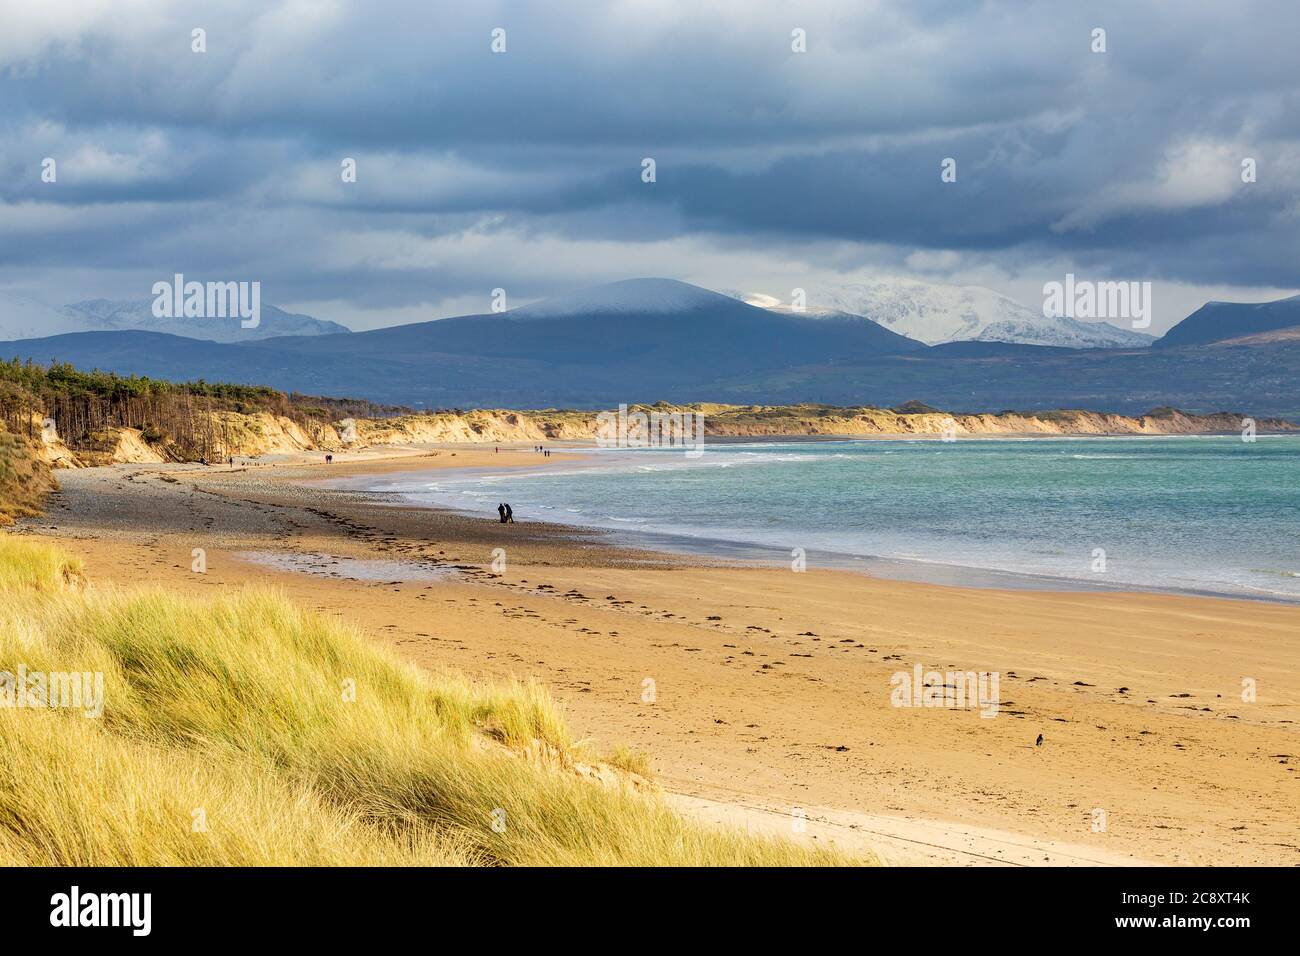 Newborough beach and sand dunes with a snow covered Mount Snowdon in the background, Anglesey, Wales Stock Photo